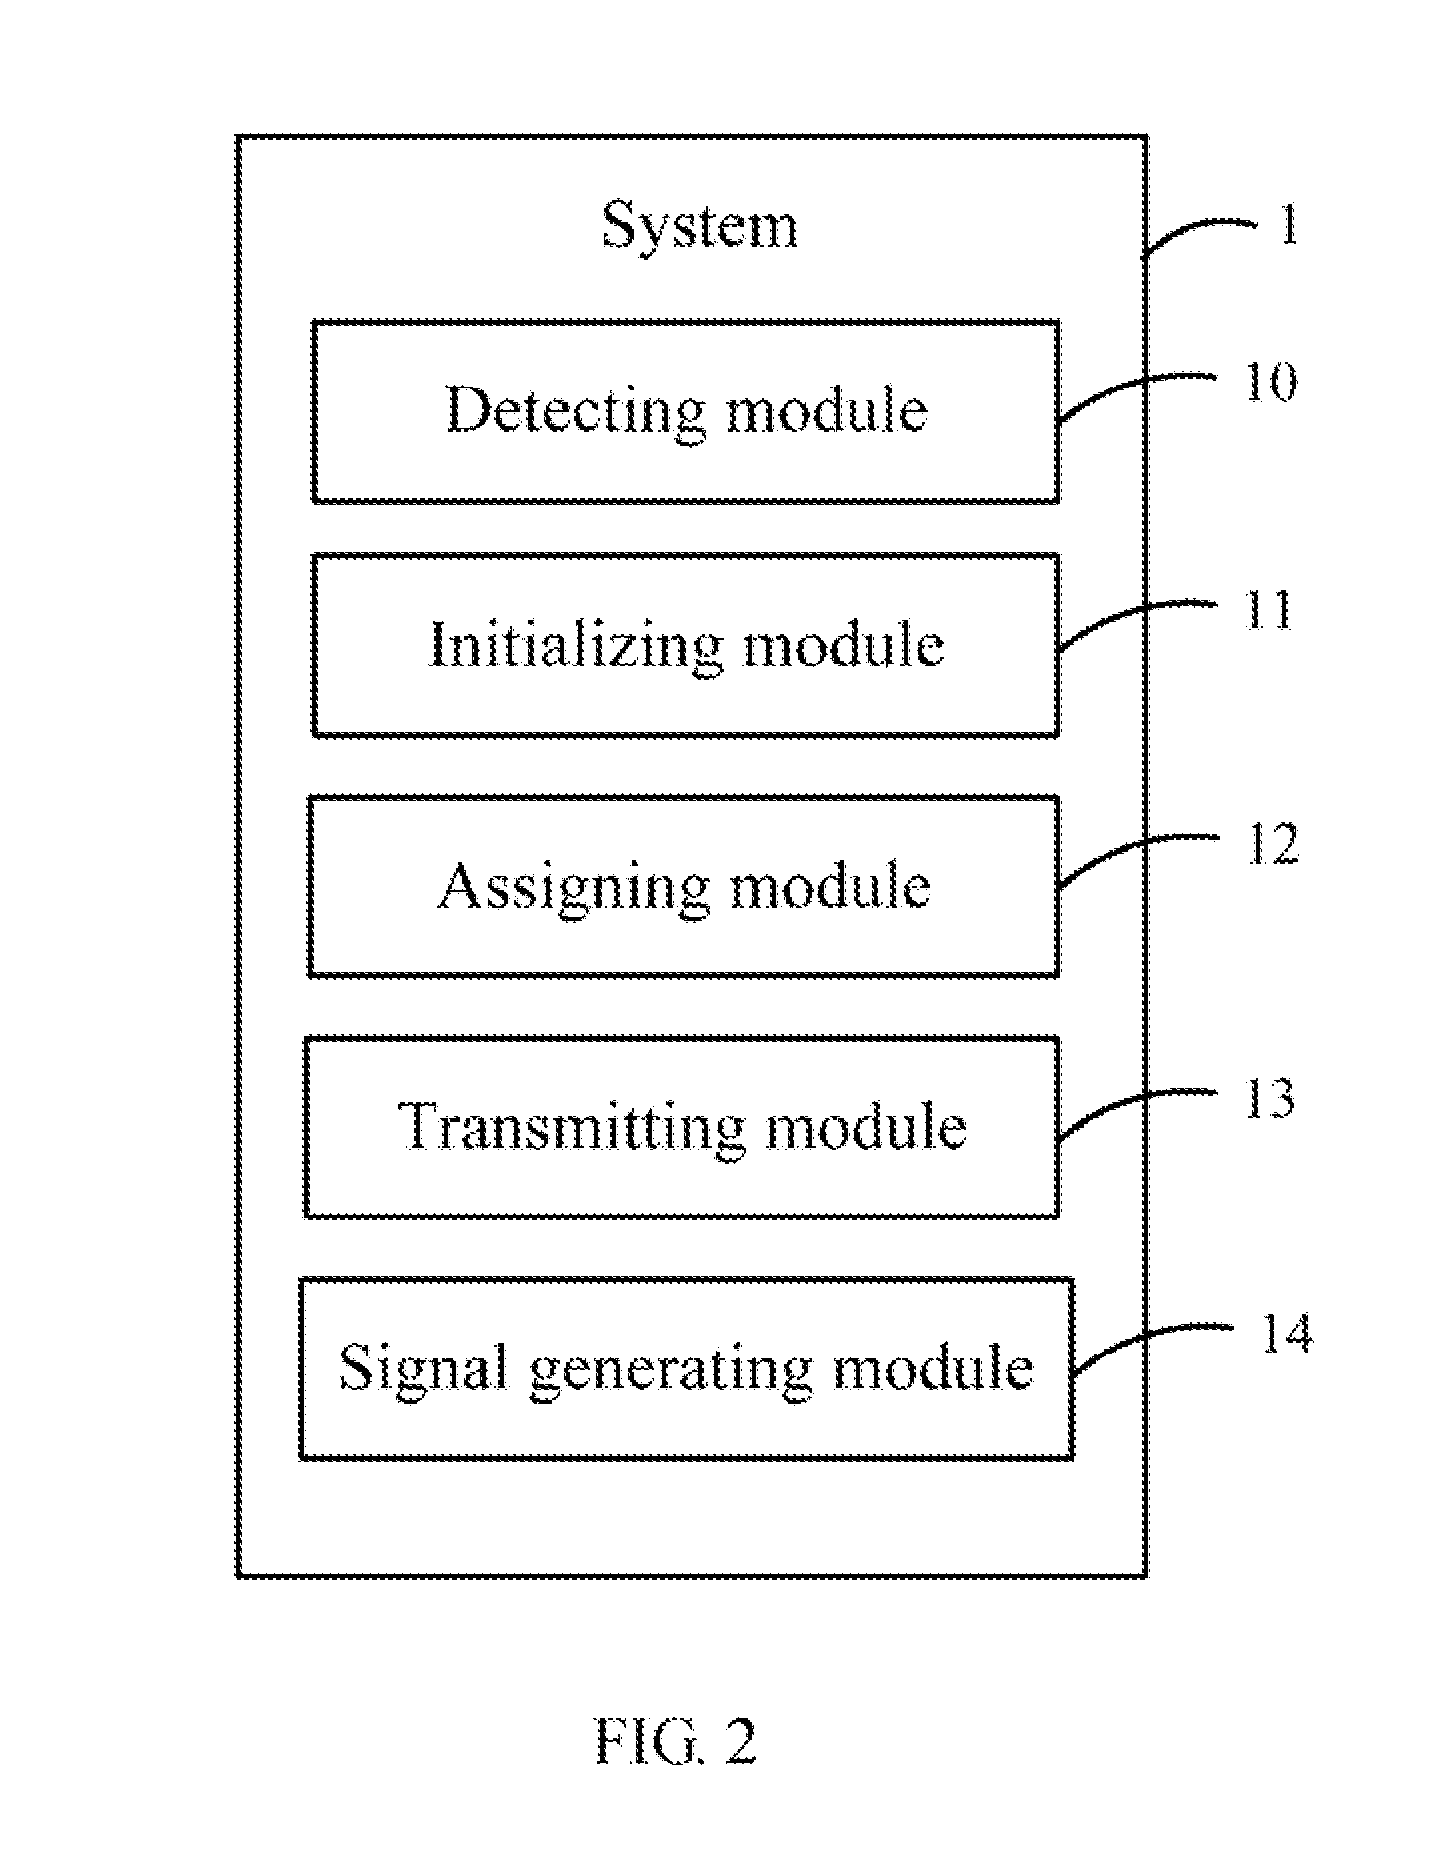 Termimal and method for updating firmware of baseboard management controller